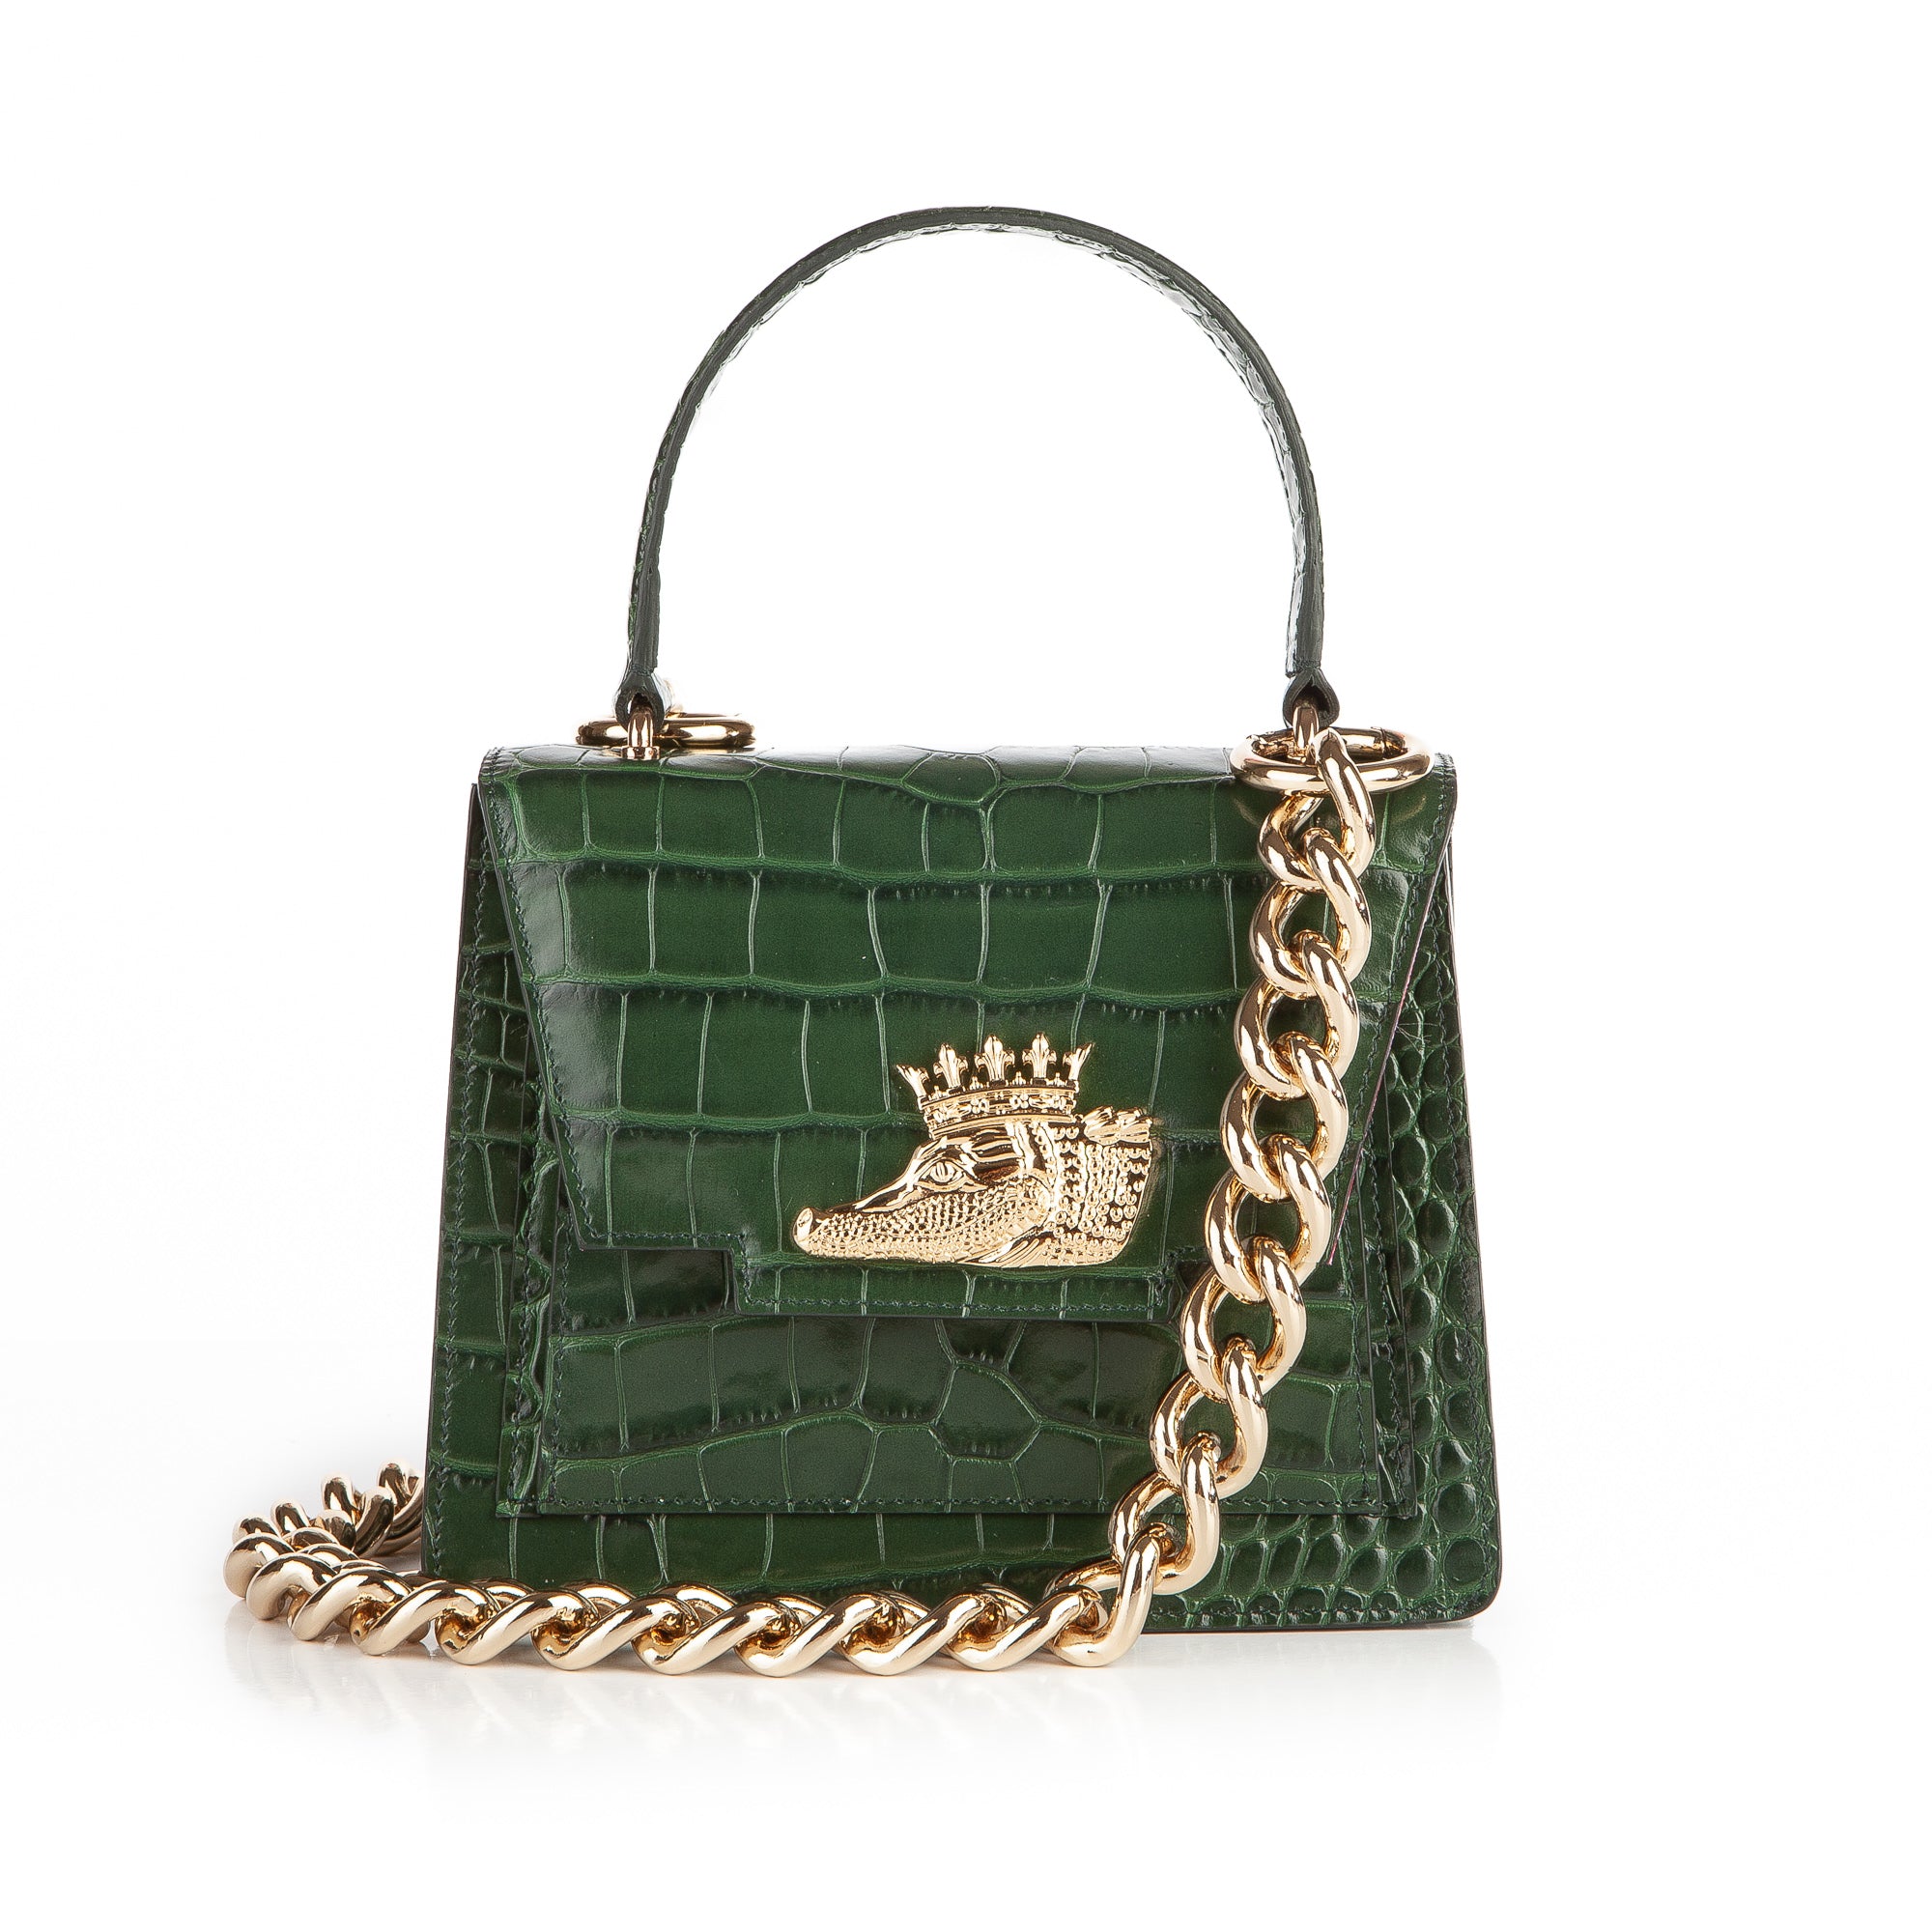 The Alexa Pulitzer for BENe Isabel in Military Croc